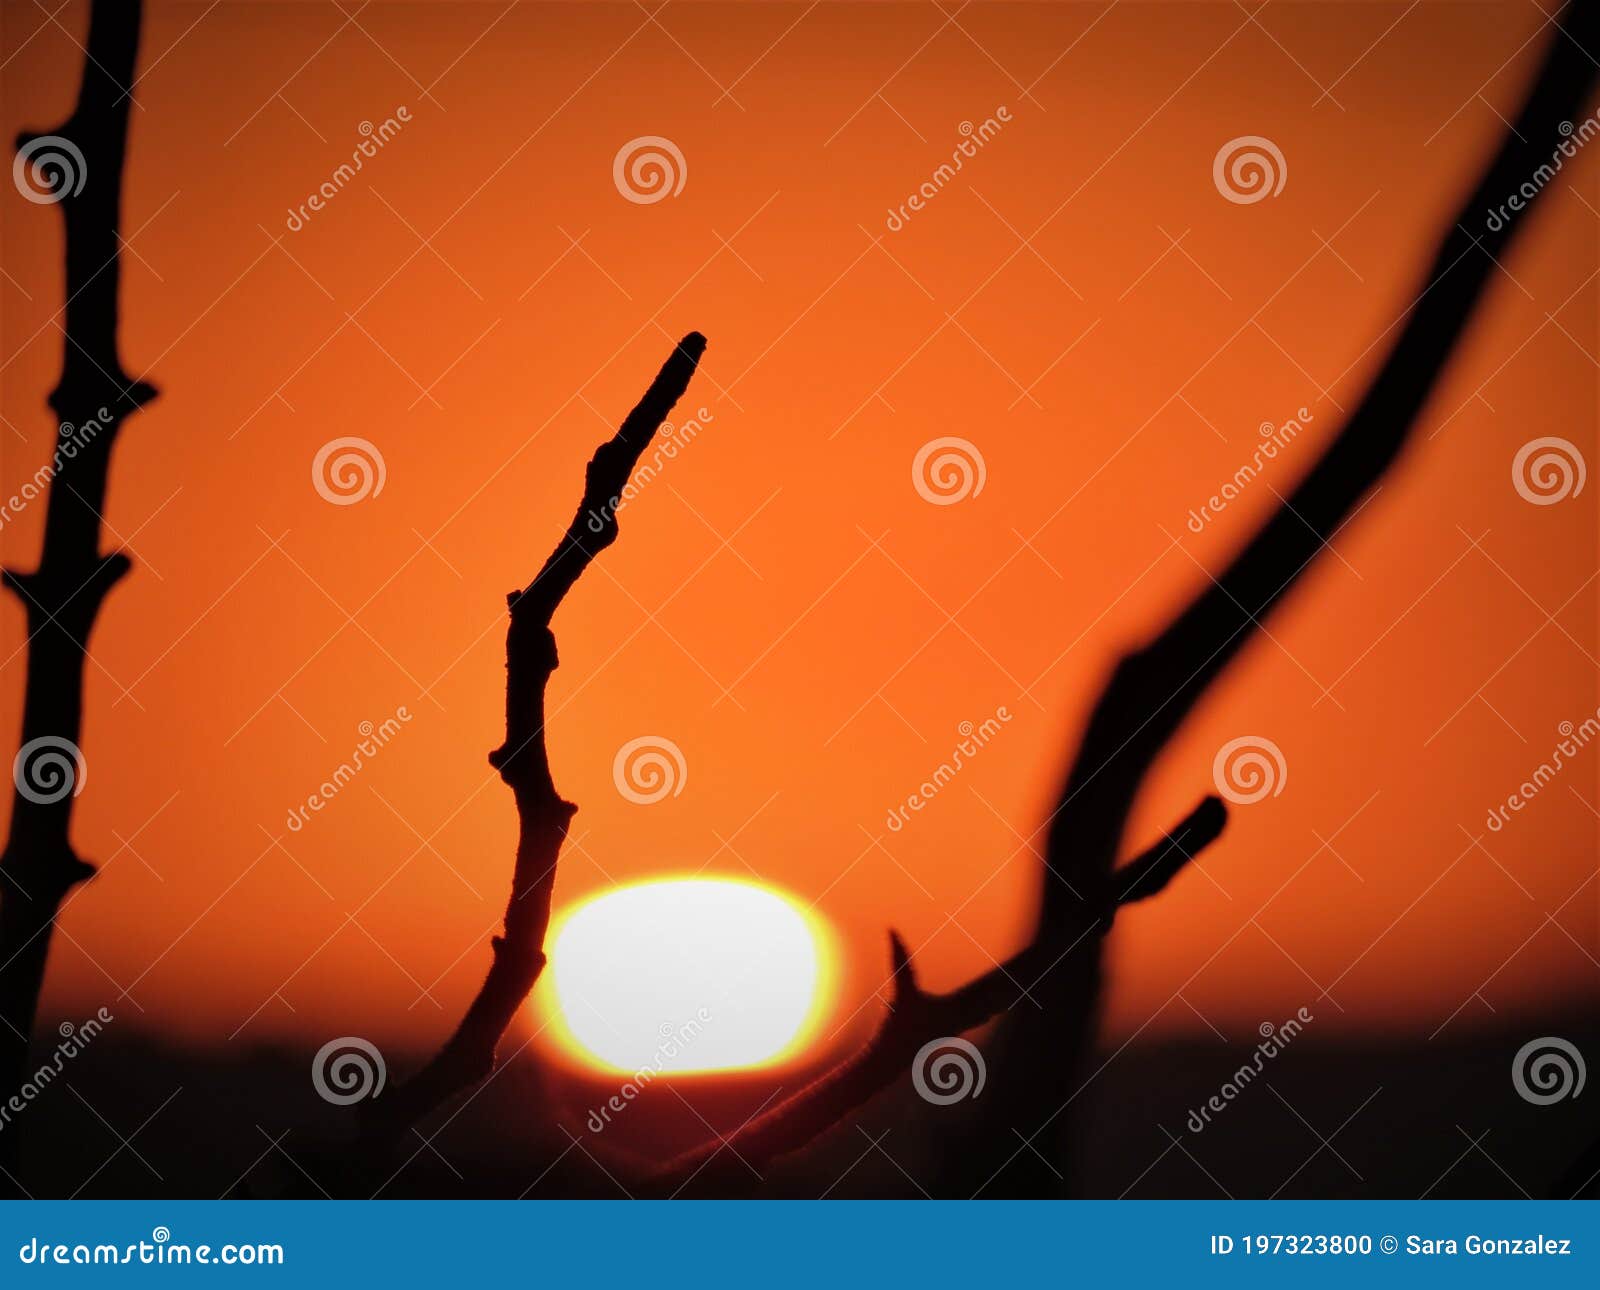 setting sun using some branches